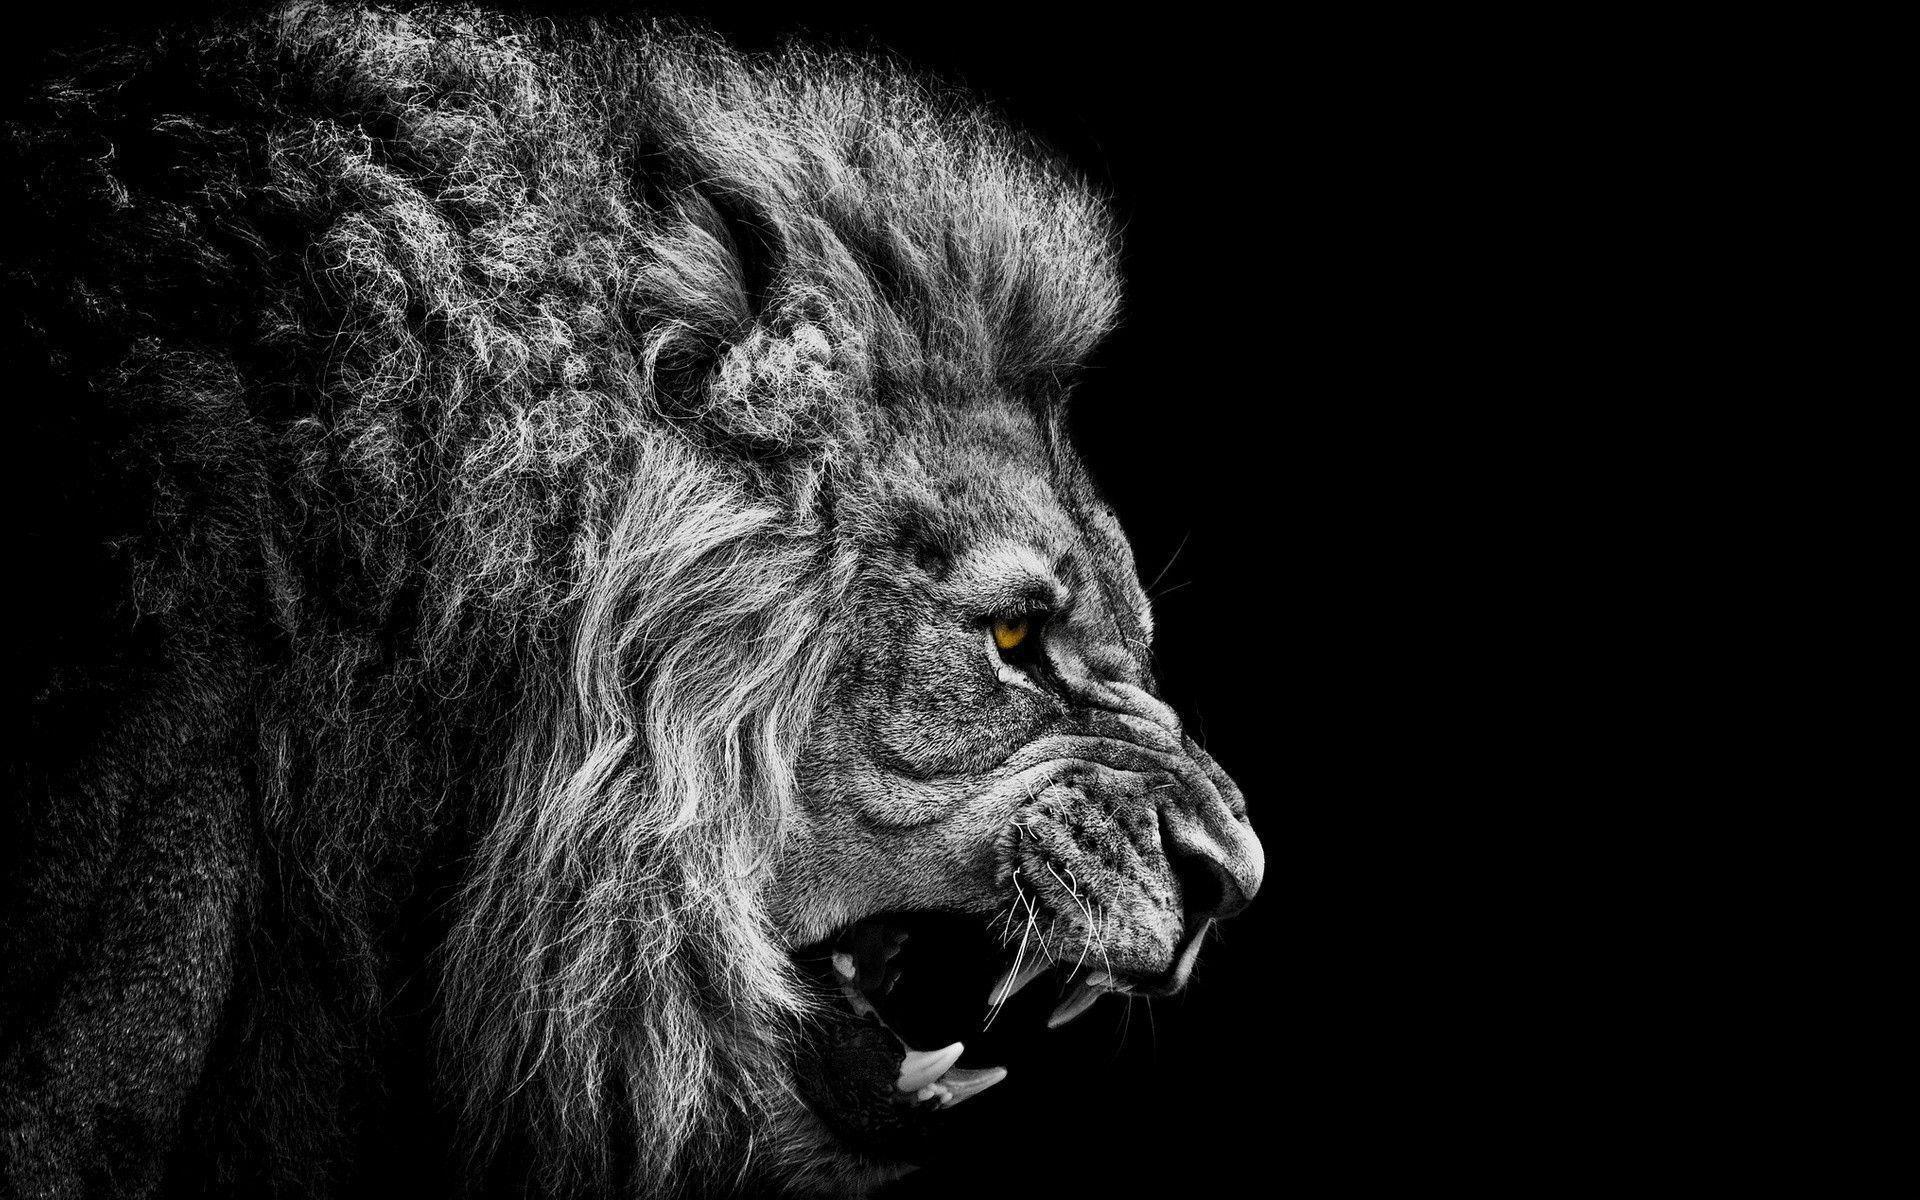 Wallpaper For > Angry Lion Face Wallpaper